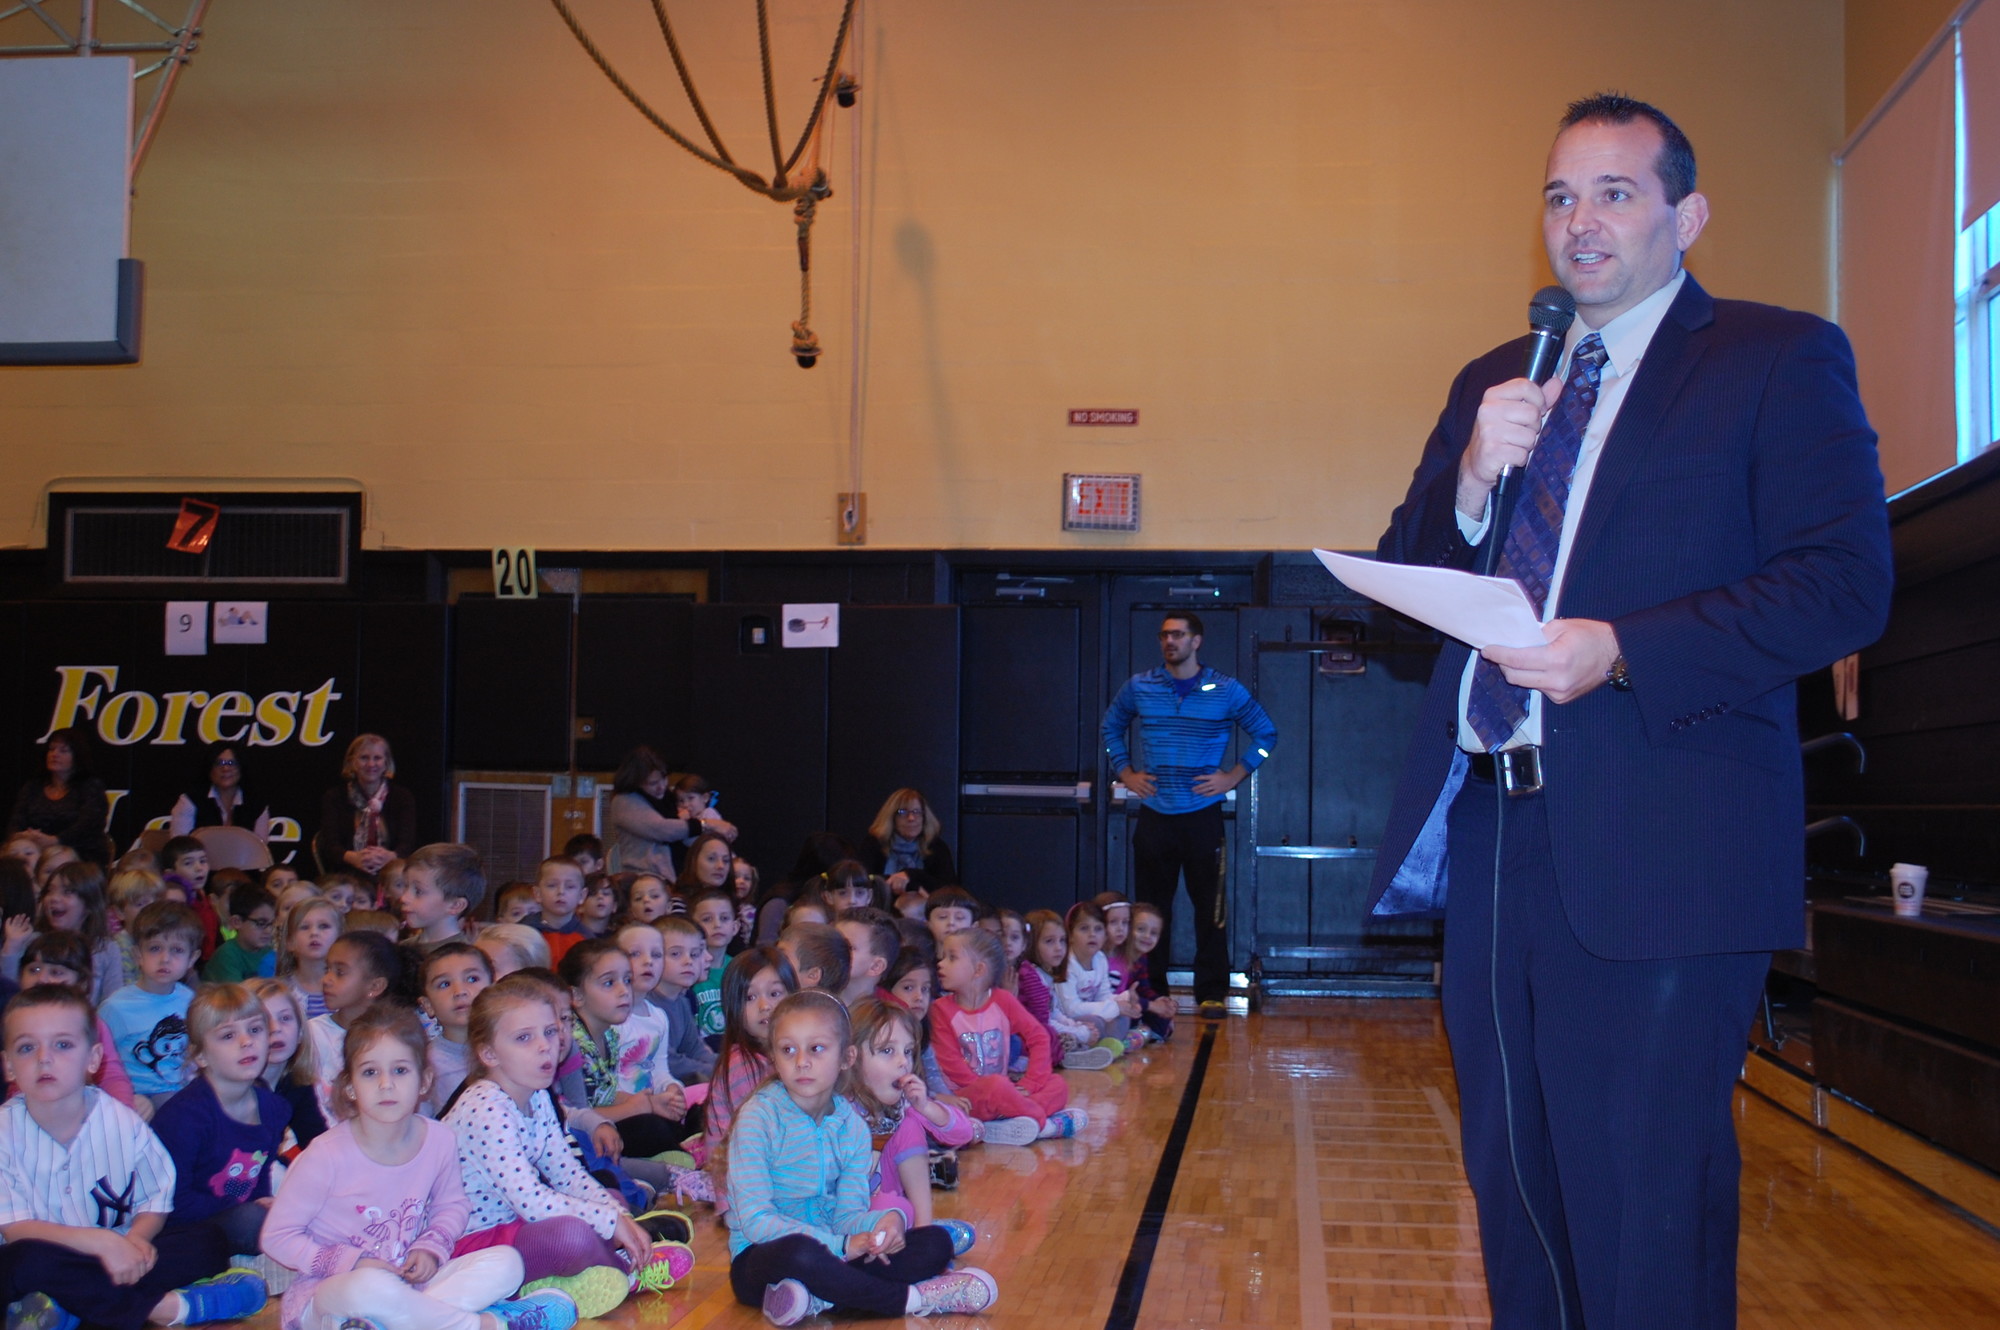 Forest Lake Principal Anthony Ciuffo greeted children at the Nov. 19 morning program.